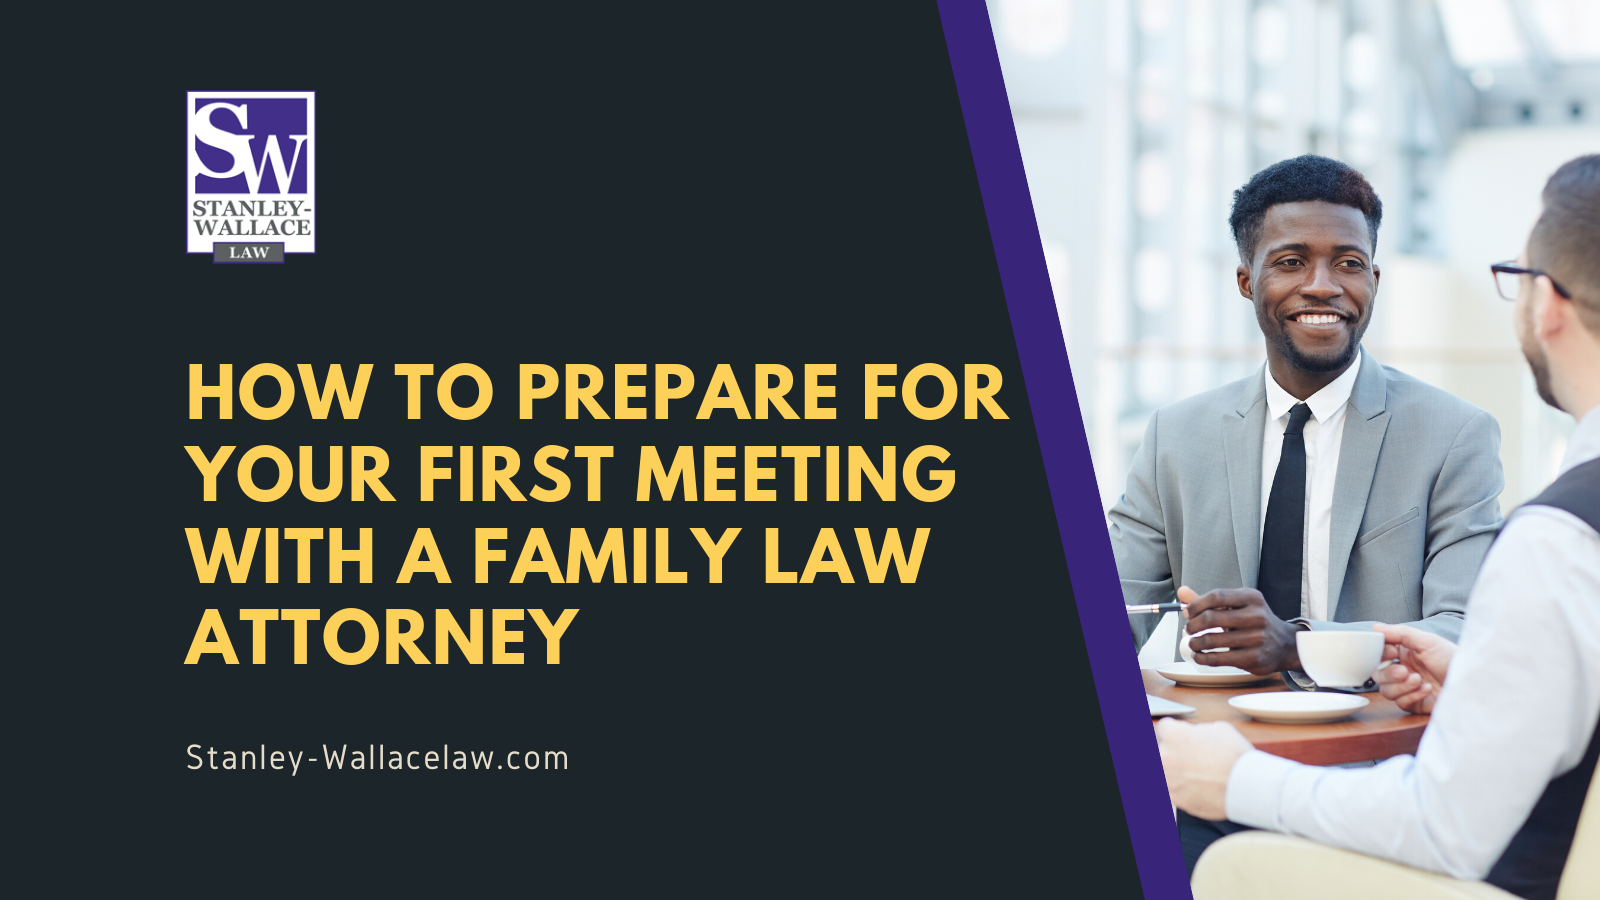 How to prepare for your first meeting with a family law attorney - Stanley-Wallace Law - slidell louisiana